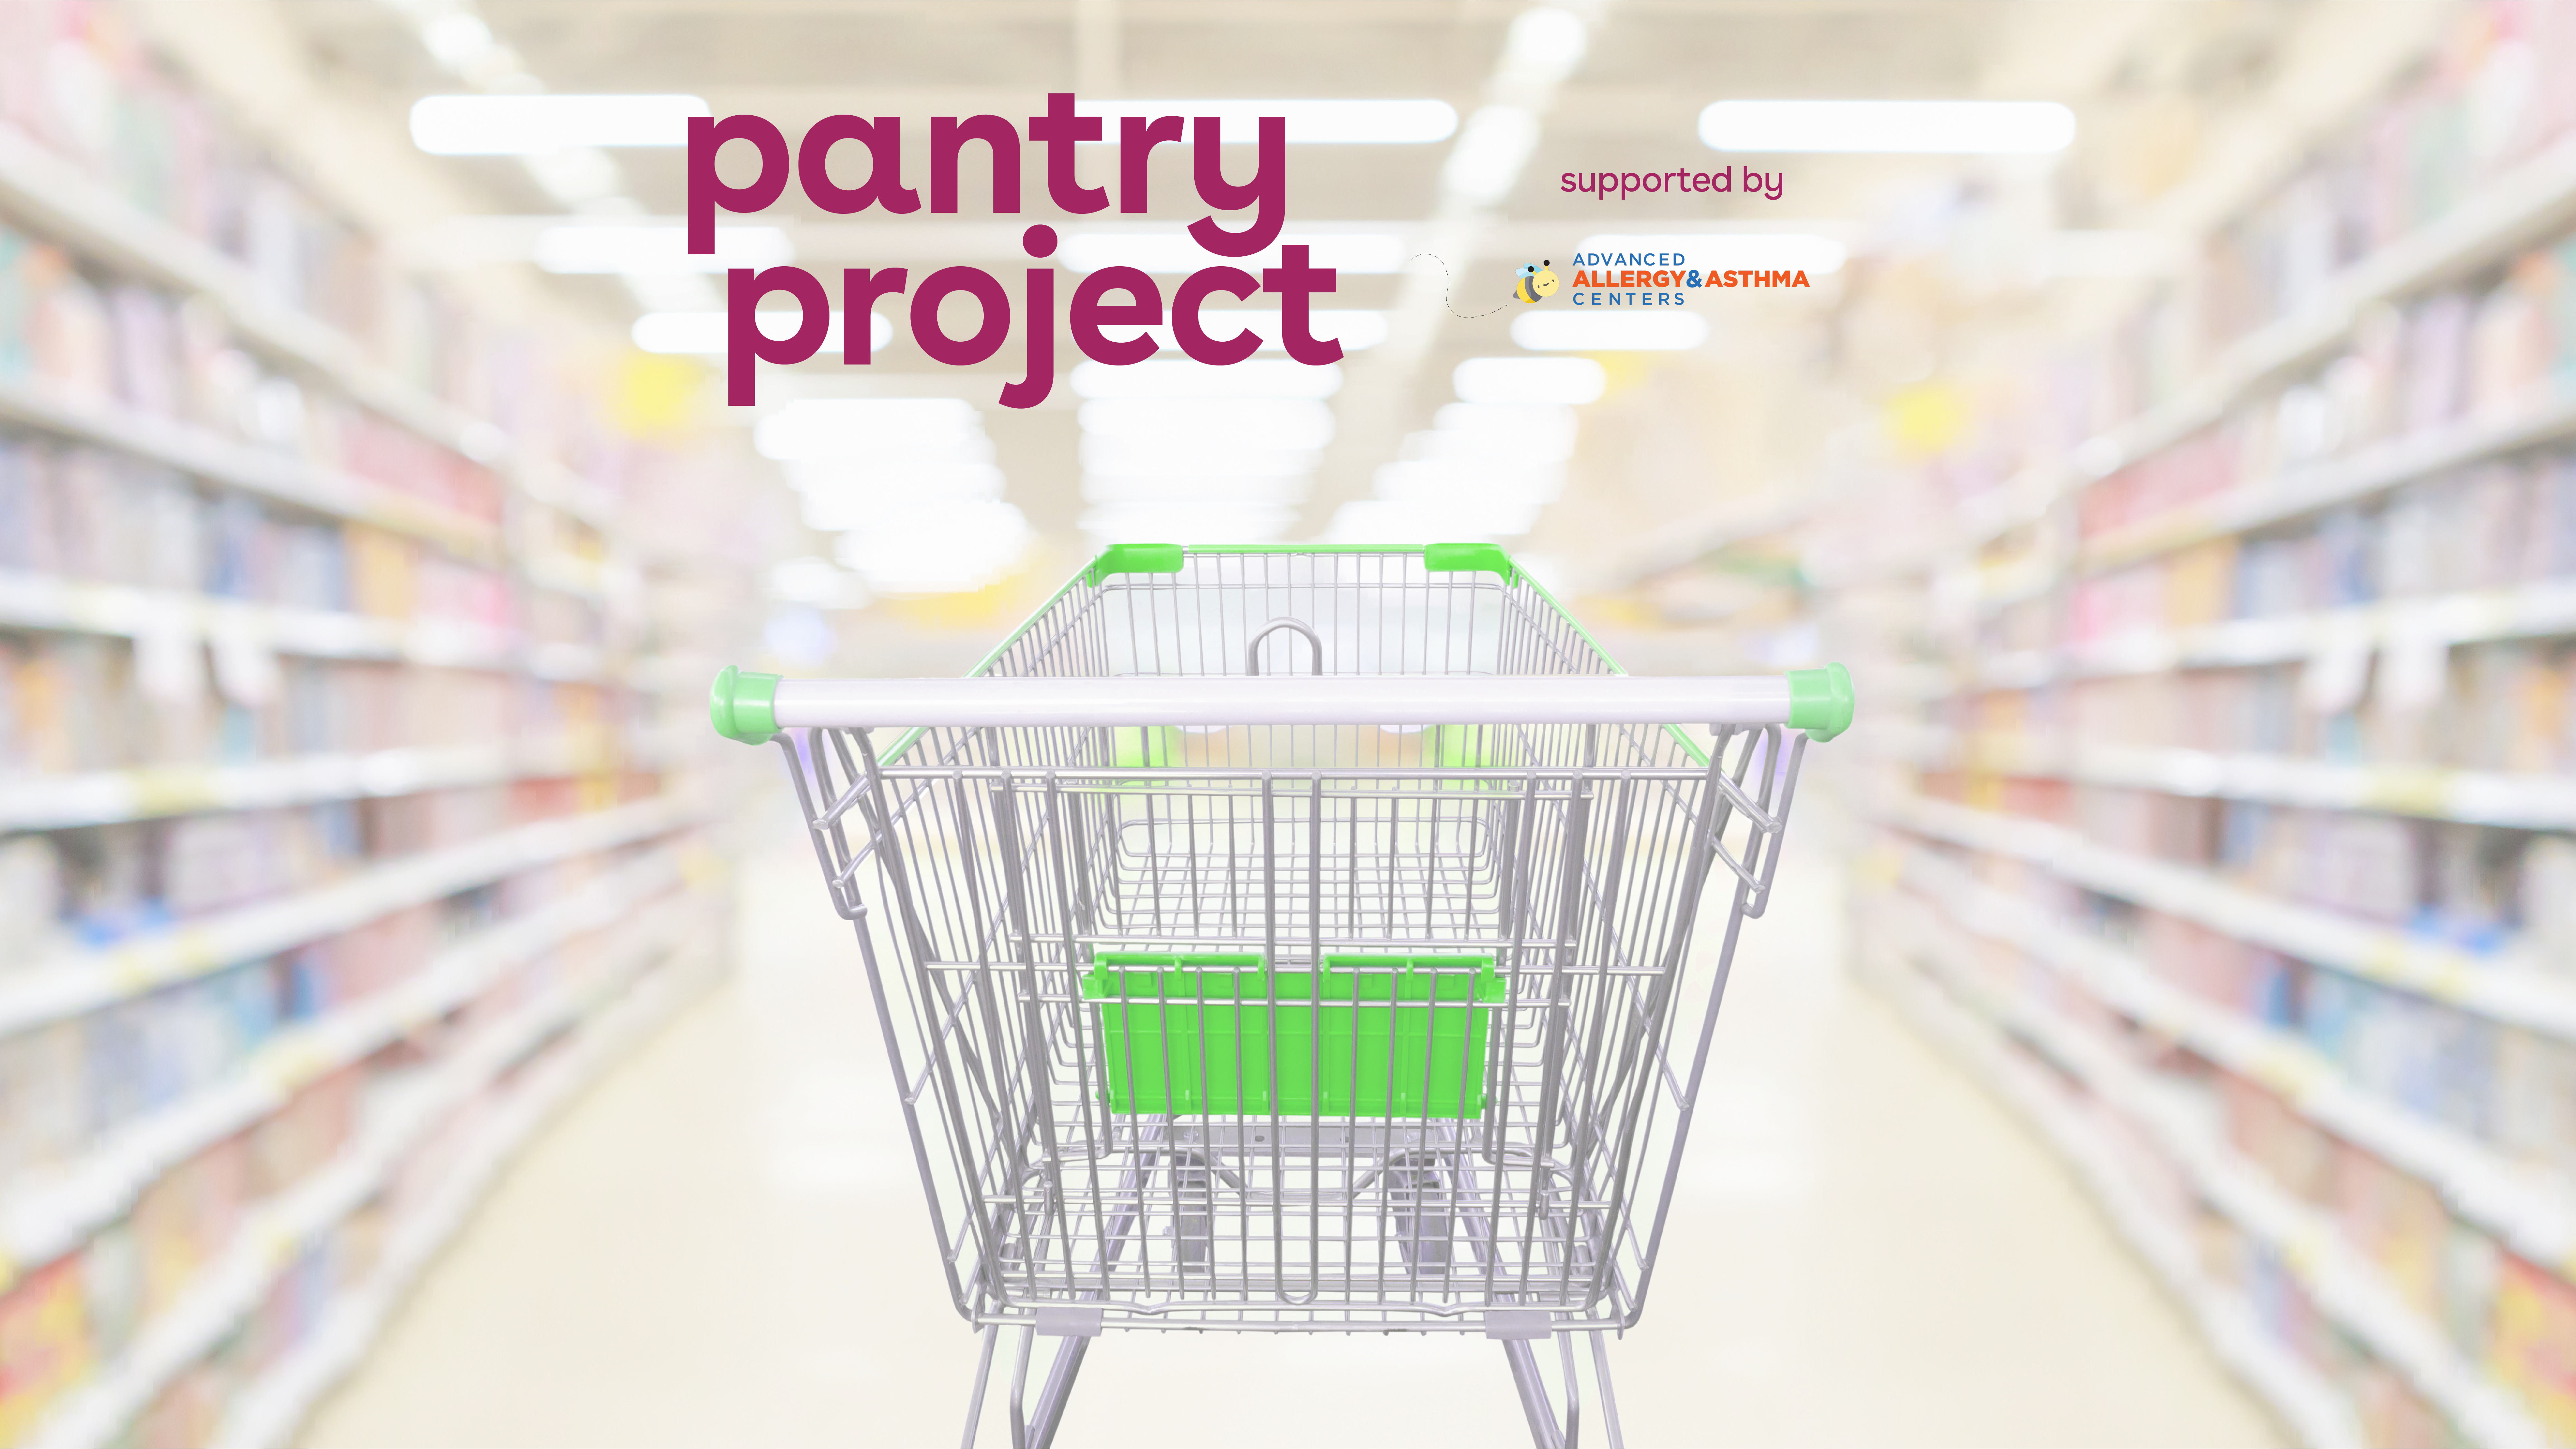 Help provide food for those in need this April with the Pantry Project, supported by Advanced Allergy & Asthma Centers. Click to see locations